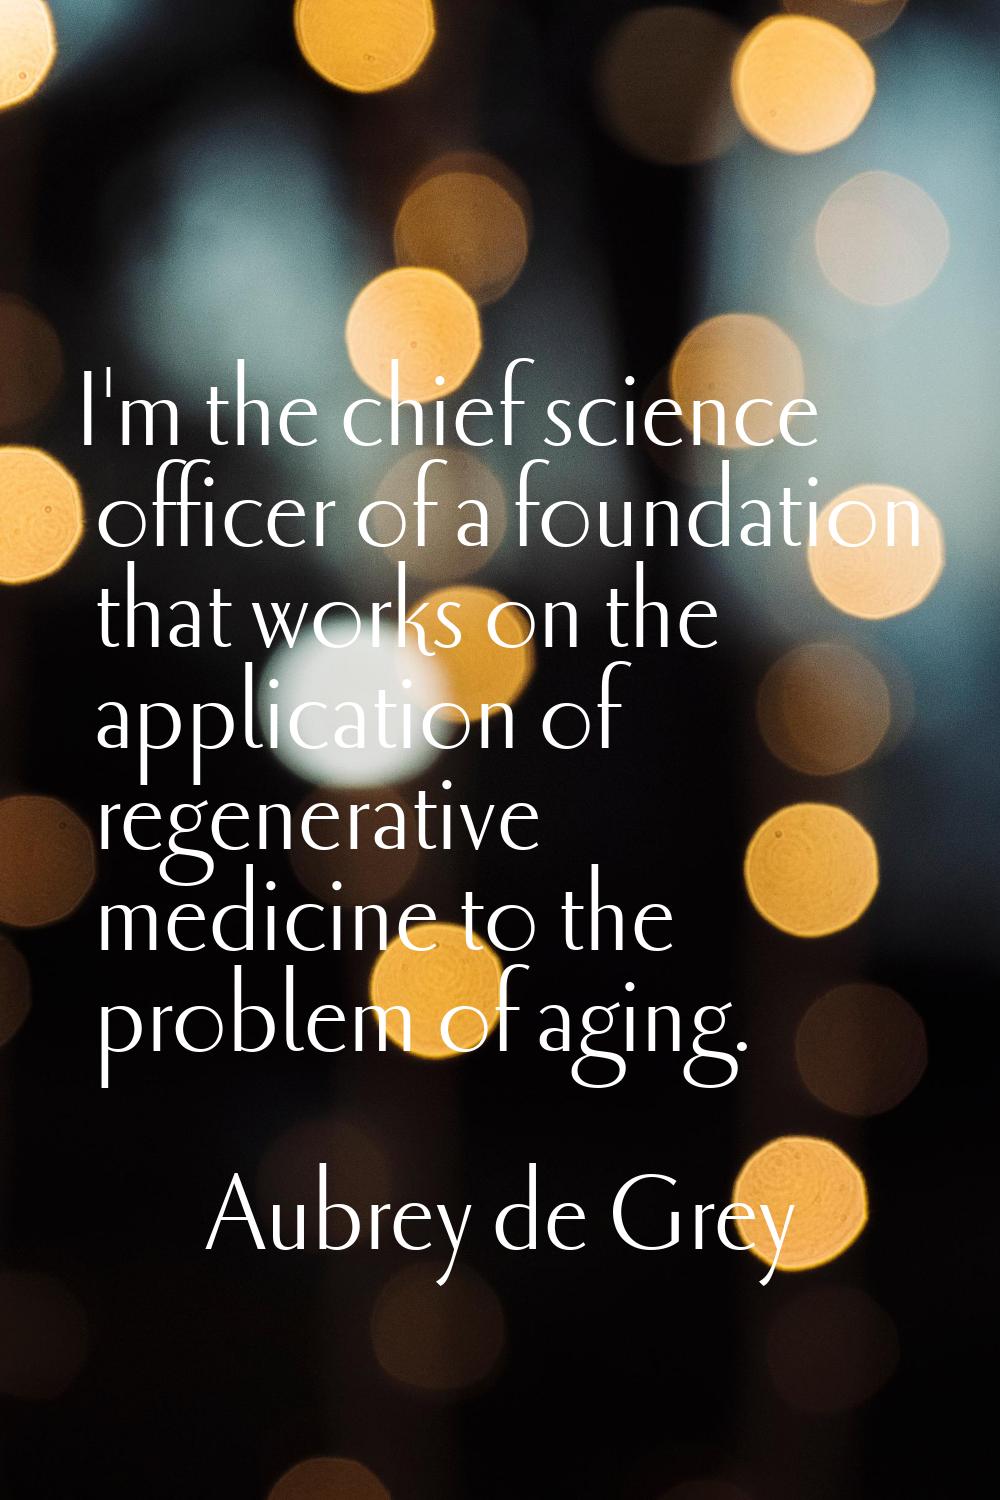 I'm the chief science officer of a foundation that works on the application of regenerative medicin